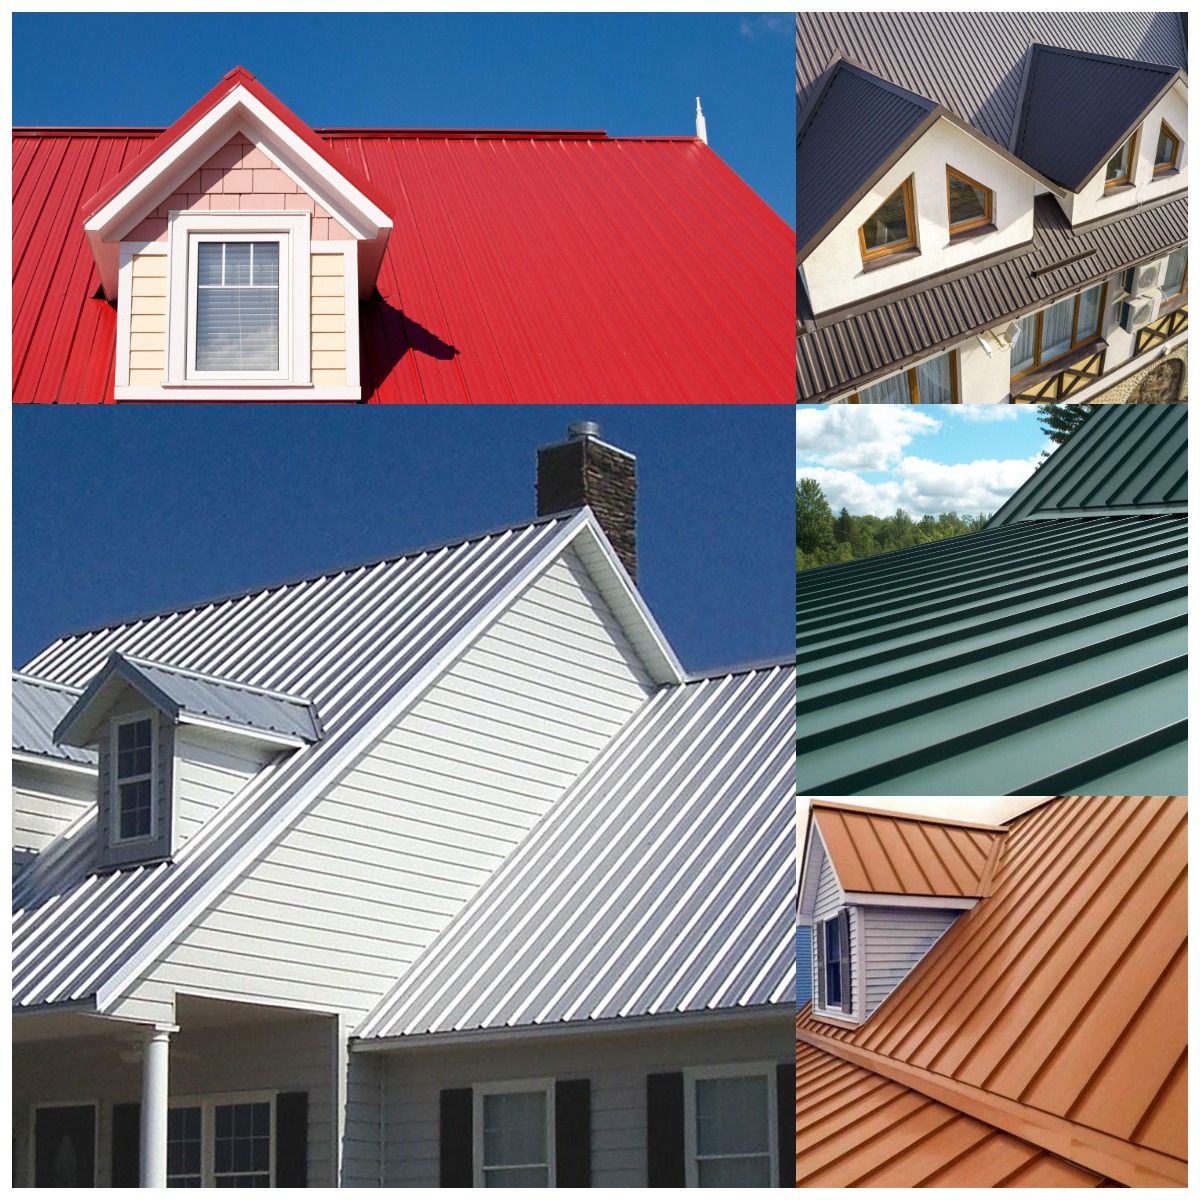 Roofing Sheet Used Corrugated Roof Sheet Construction Materials Color Corrugated Steel Shingles Plain Roof Tiles Modern